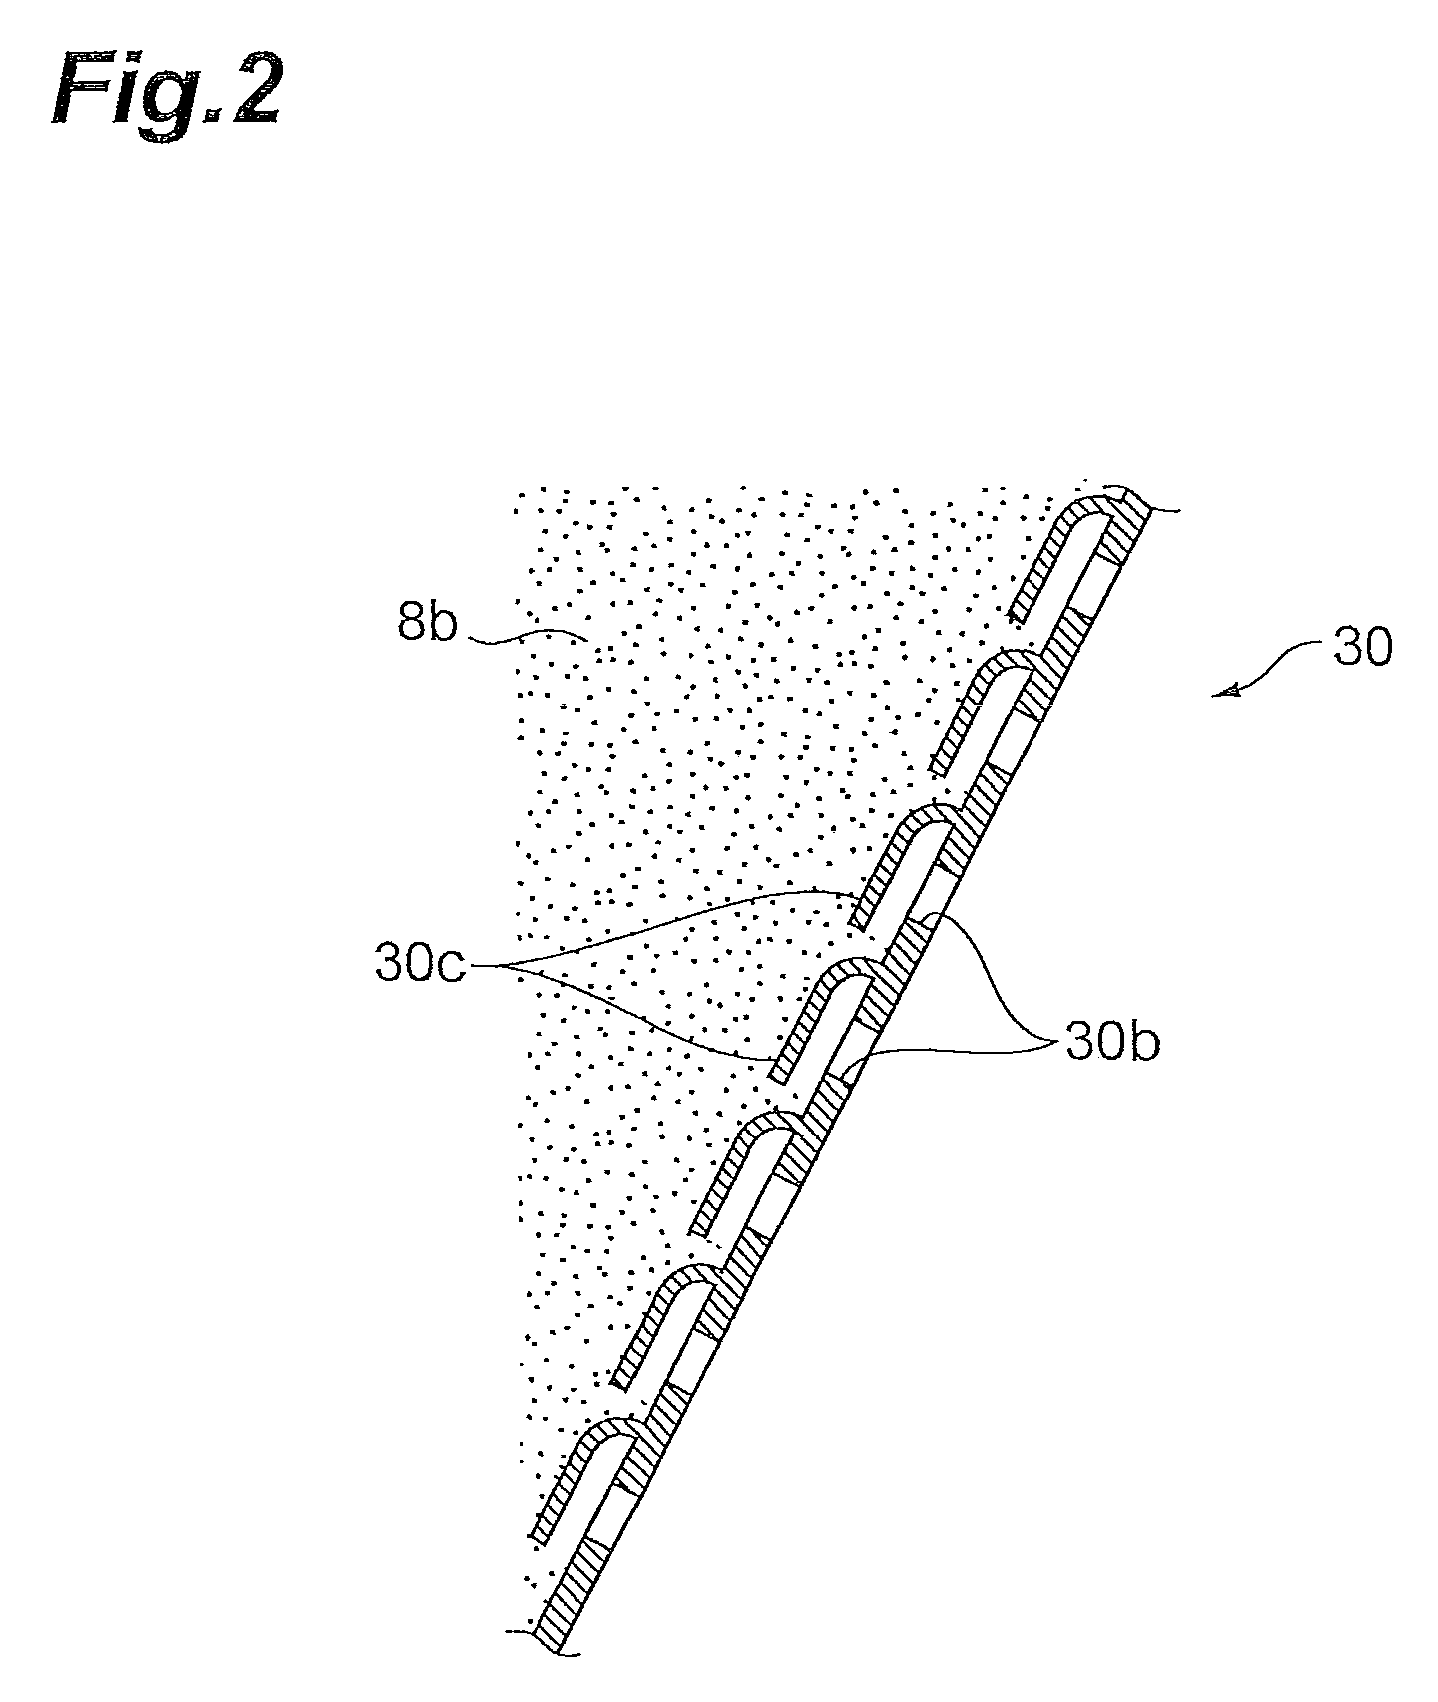 Spouted-fluidized bed-type olefin polymerization reactor